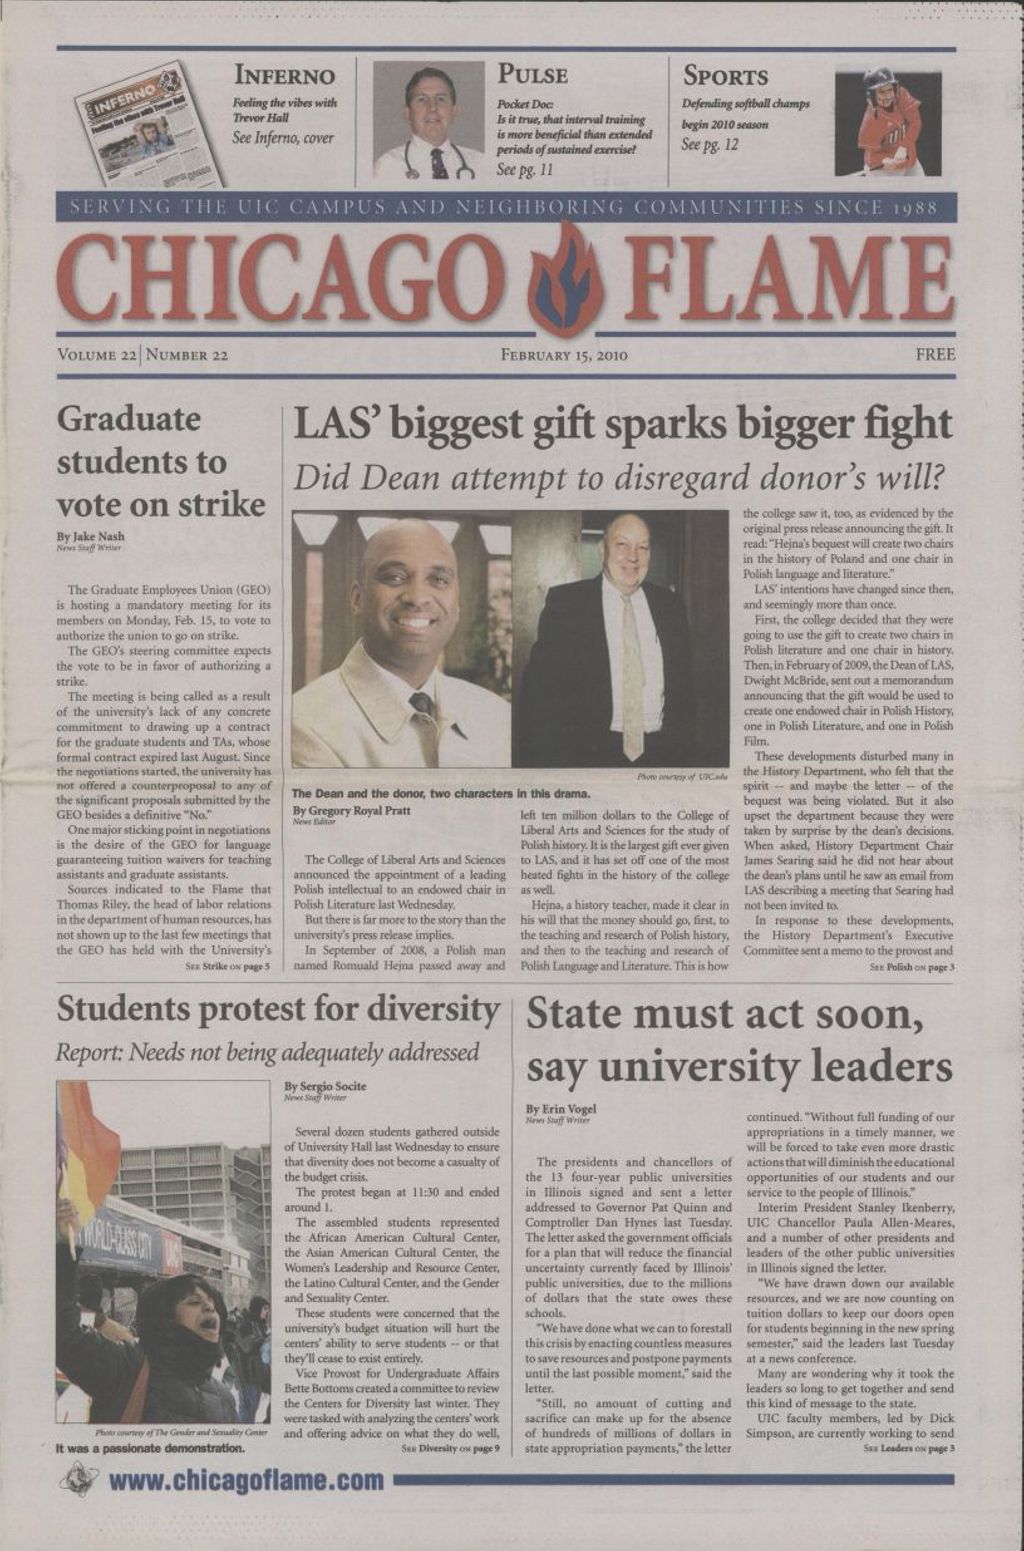 Chicago Flame (February 15, 2010)